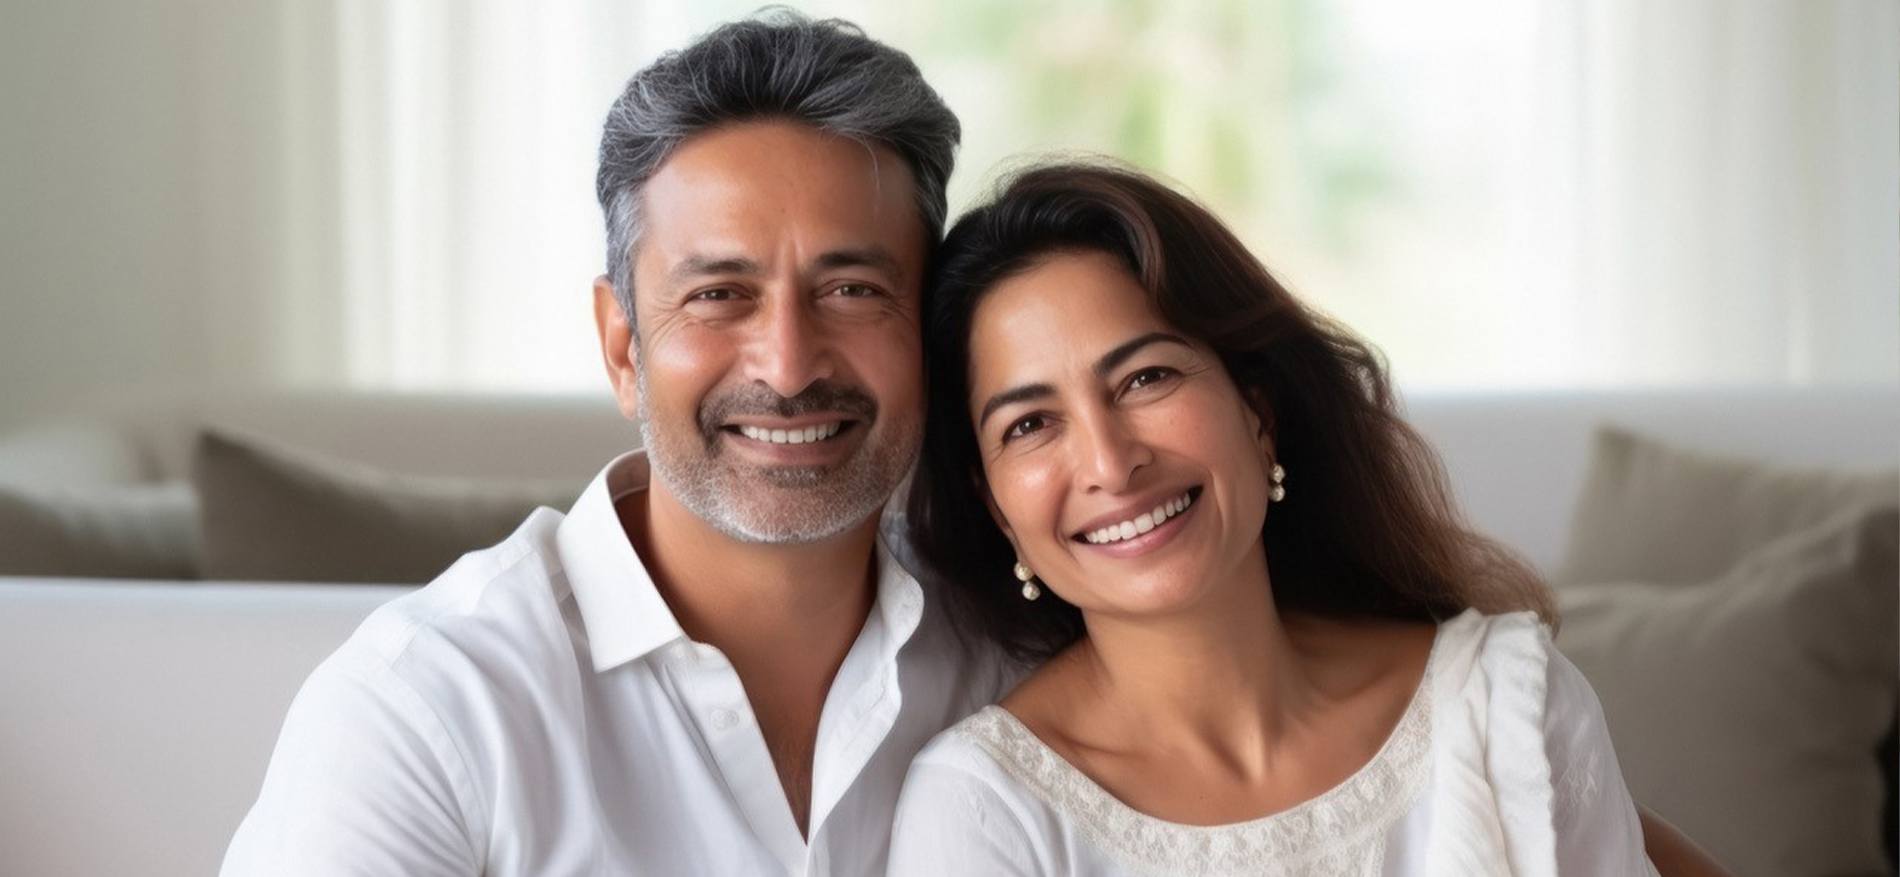 Man and woman with healthy smile after dental services